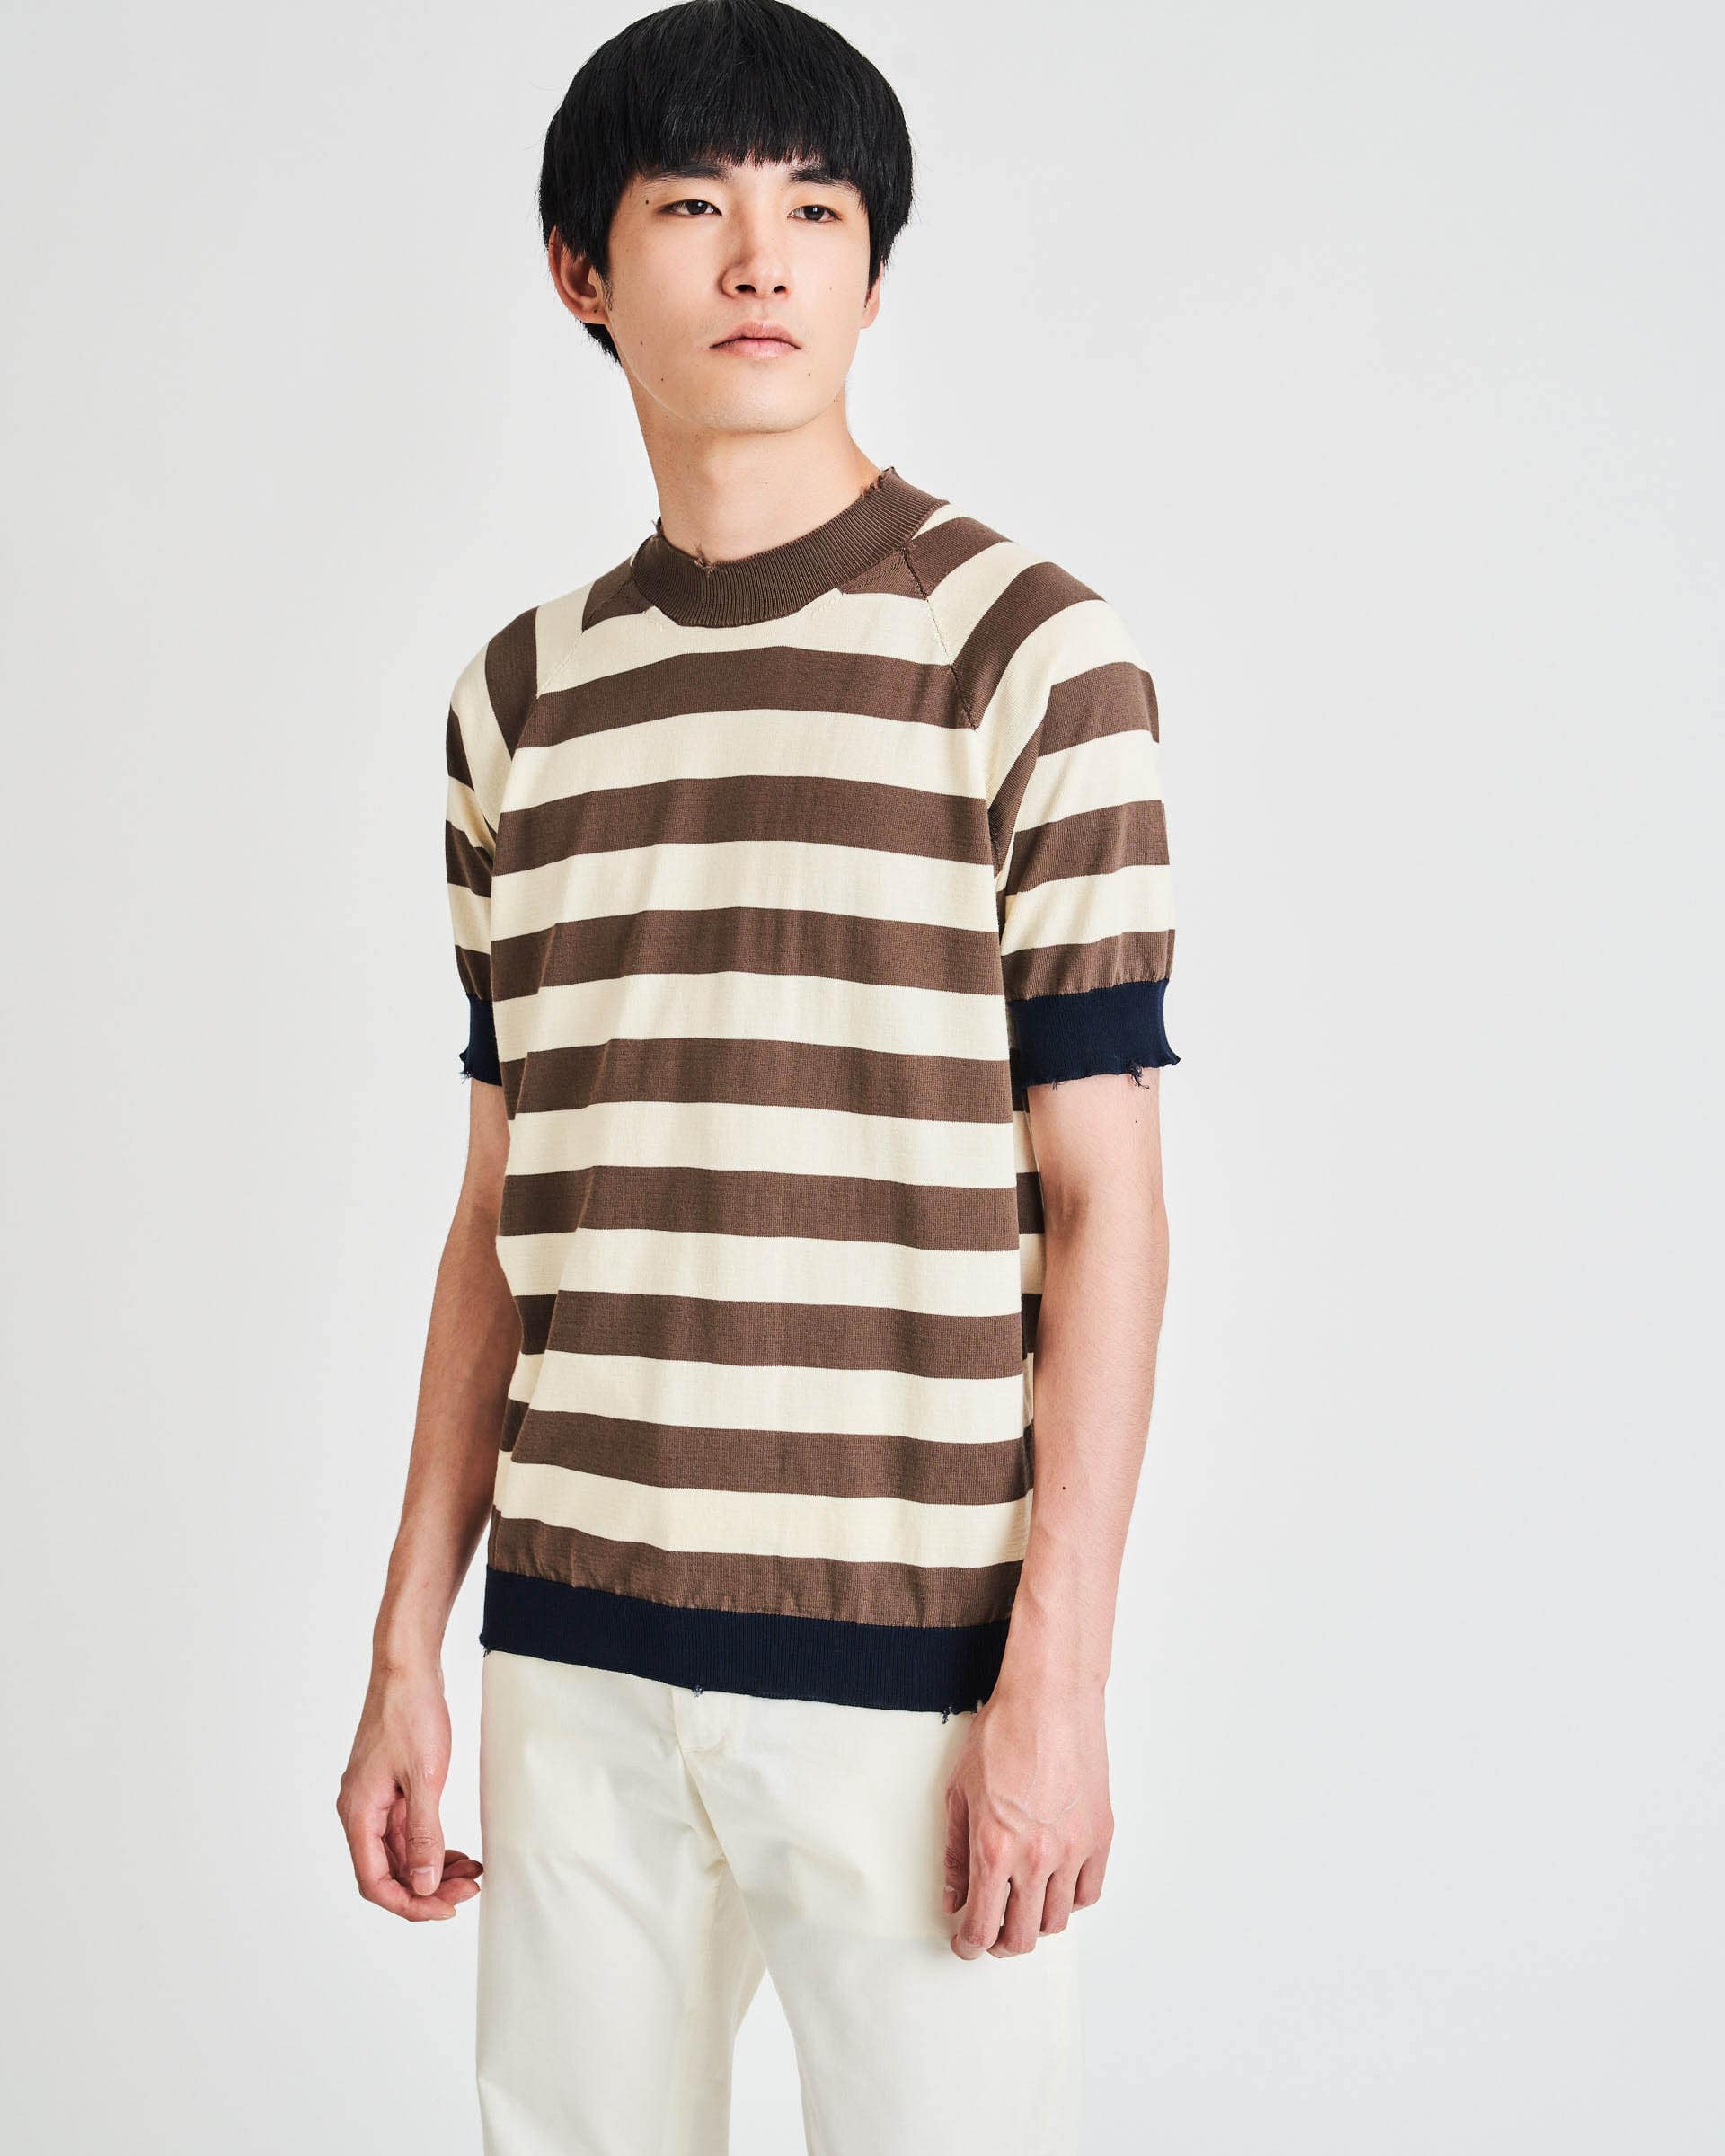 The Market Store | Striped Sweater With Breaks